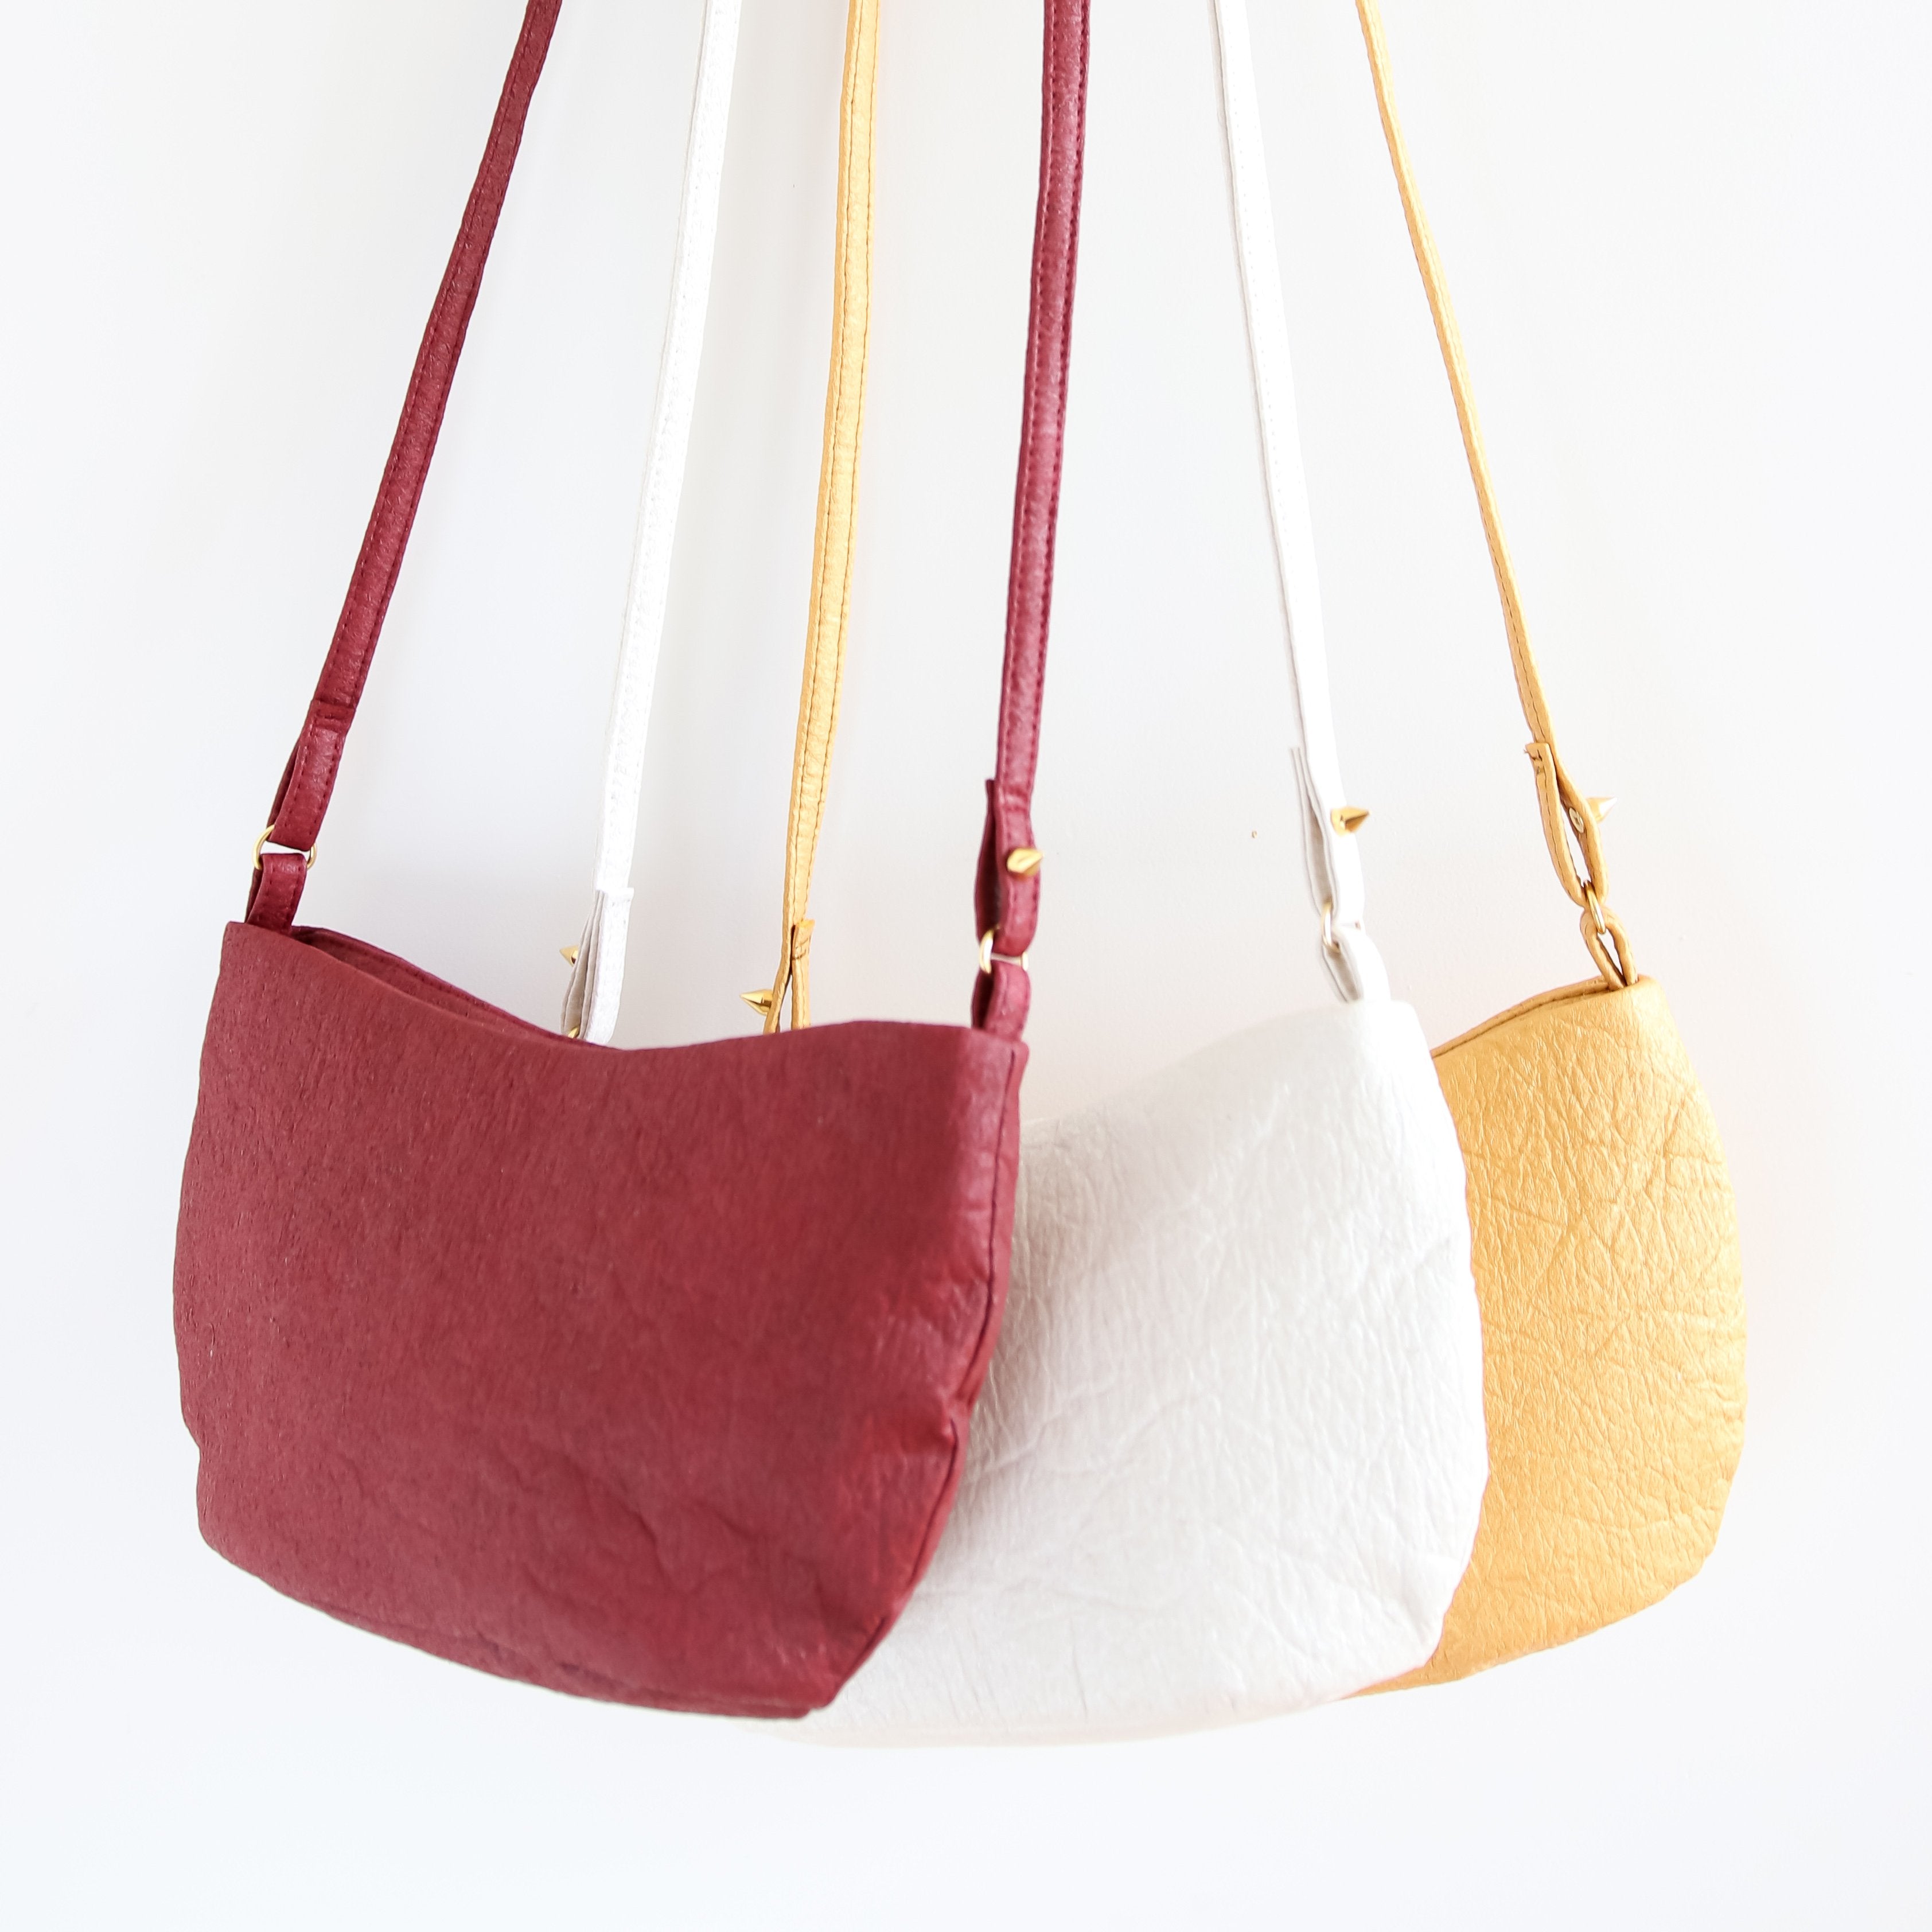 Vegan handbags made in NZ from Pinatex pineapple leather